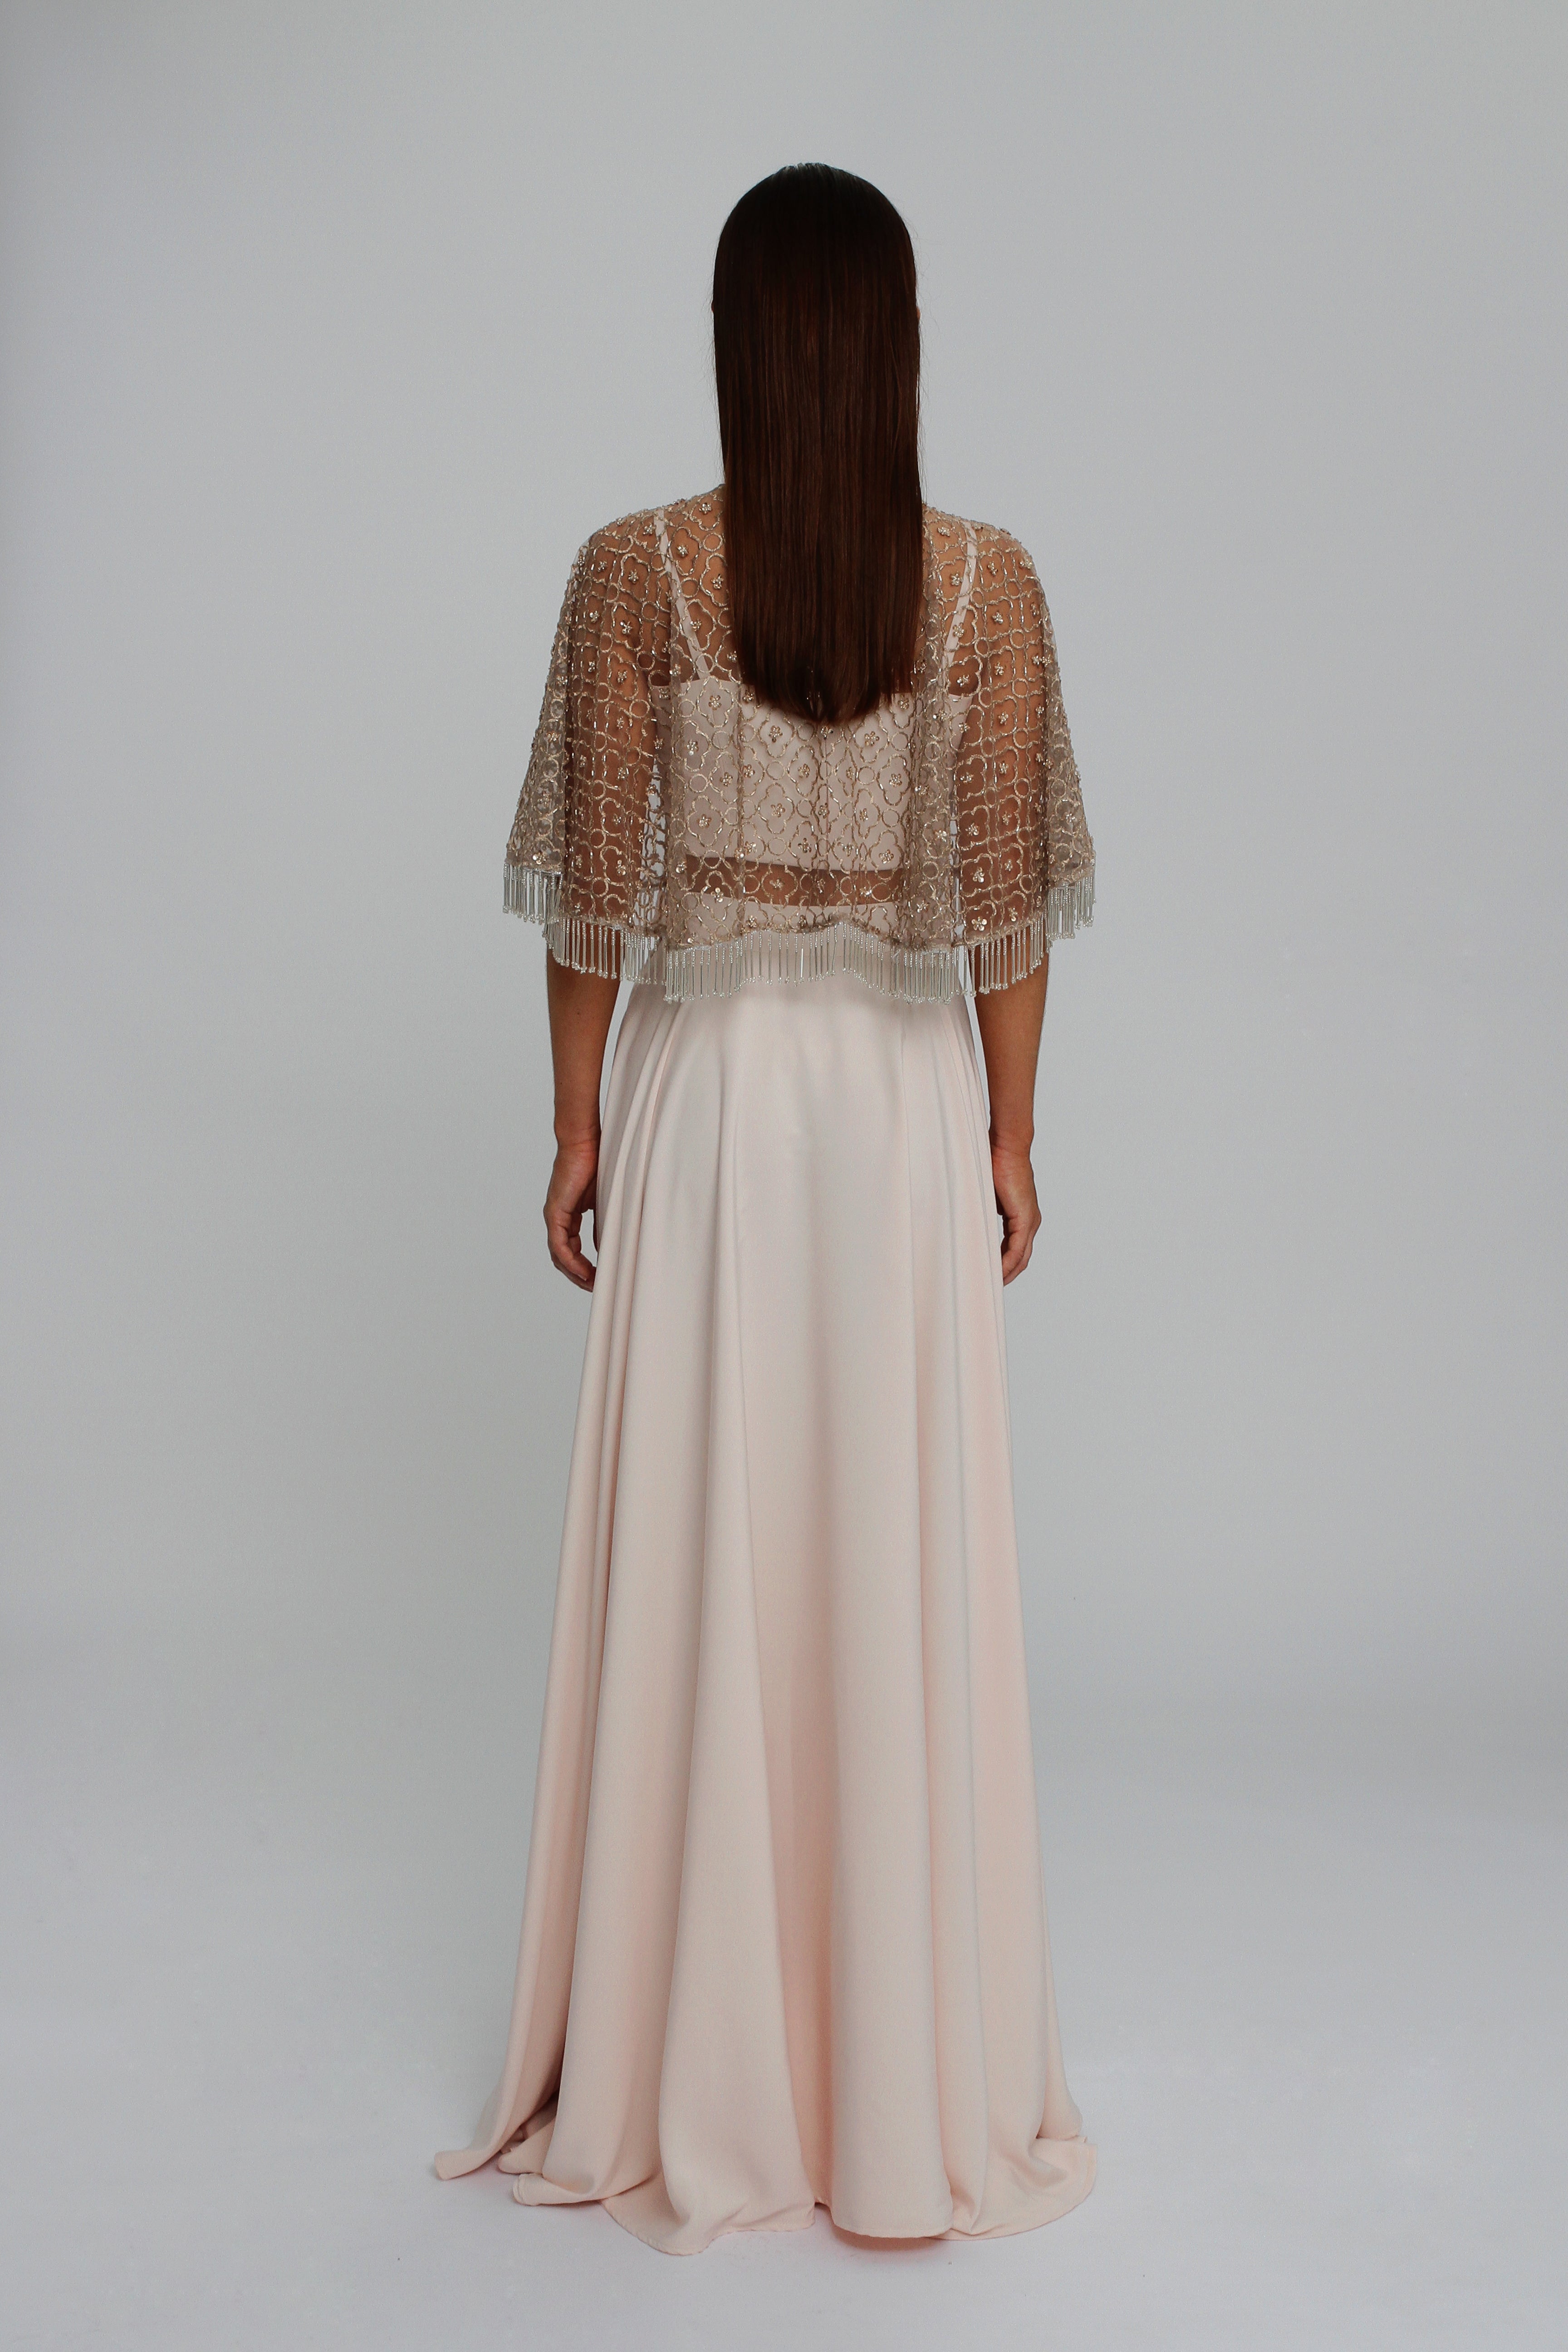 Embellished Bolero with Blush Crop Top and Evening Skirt UME London Cape Evening Outfits London Back